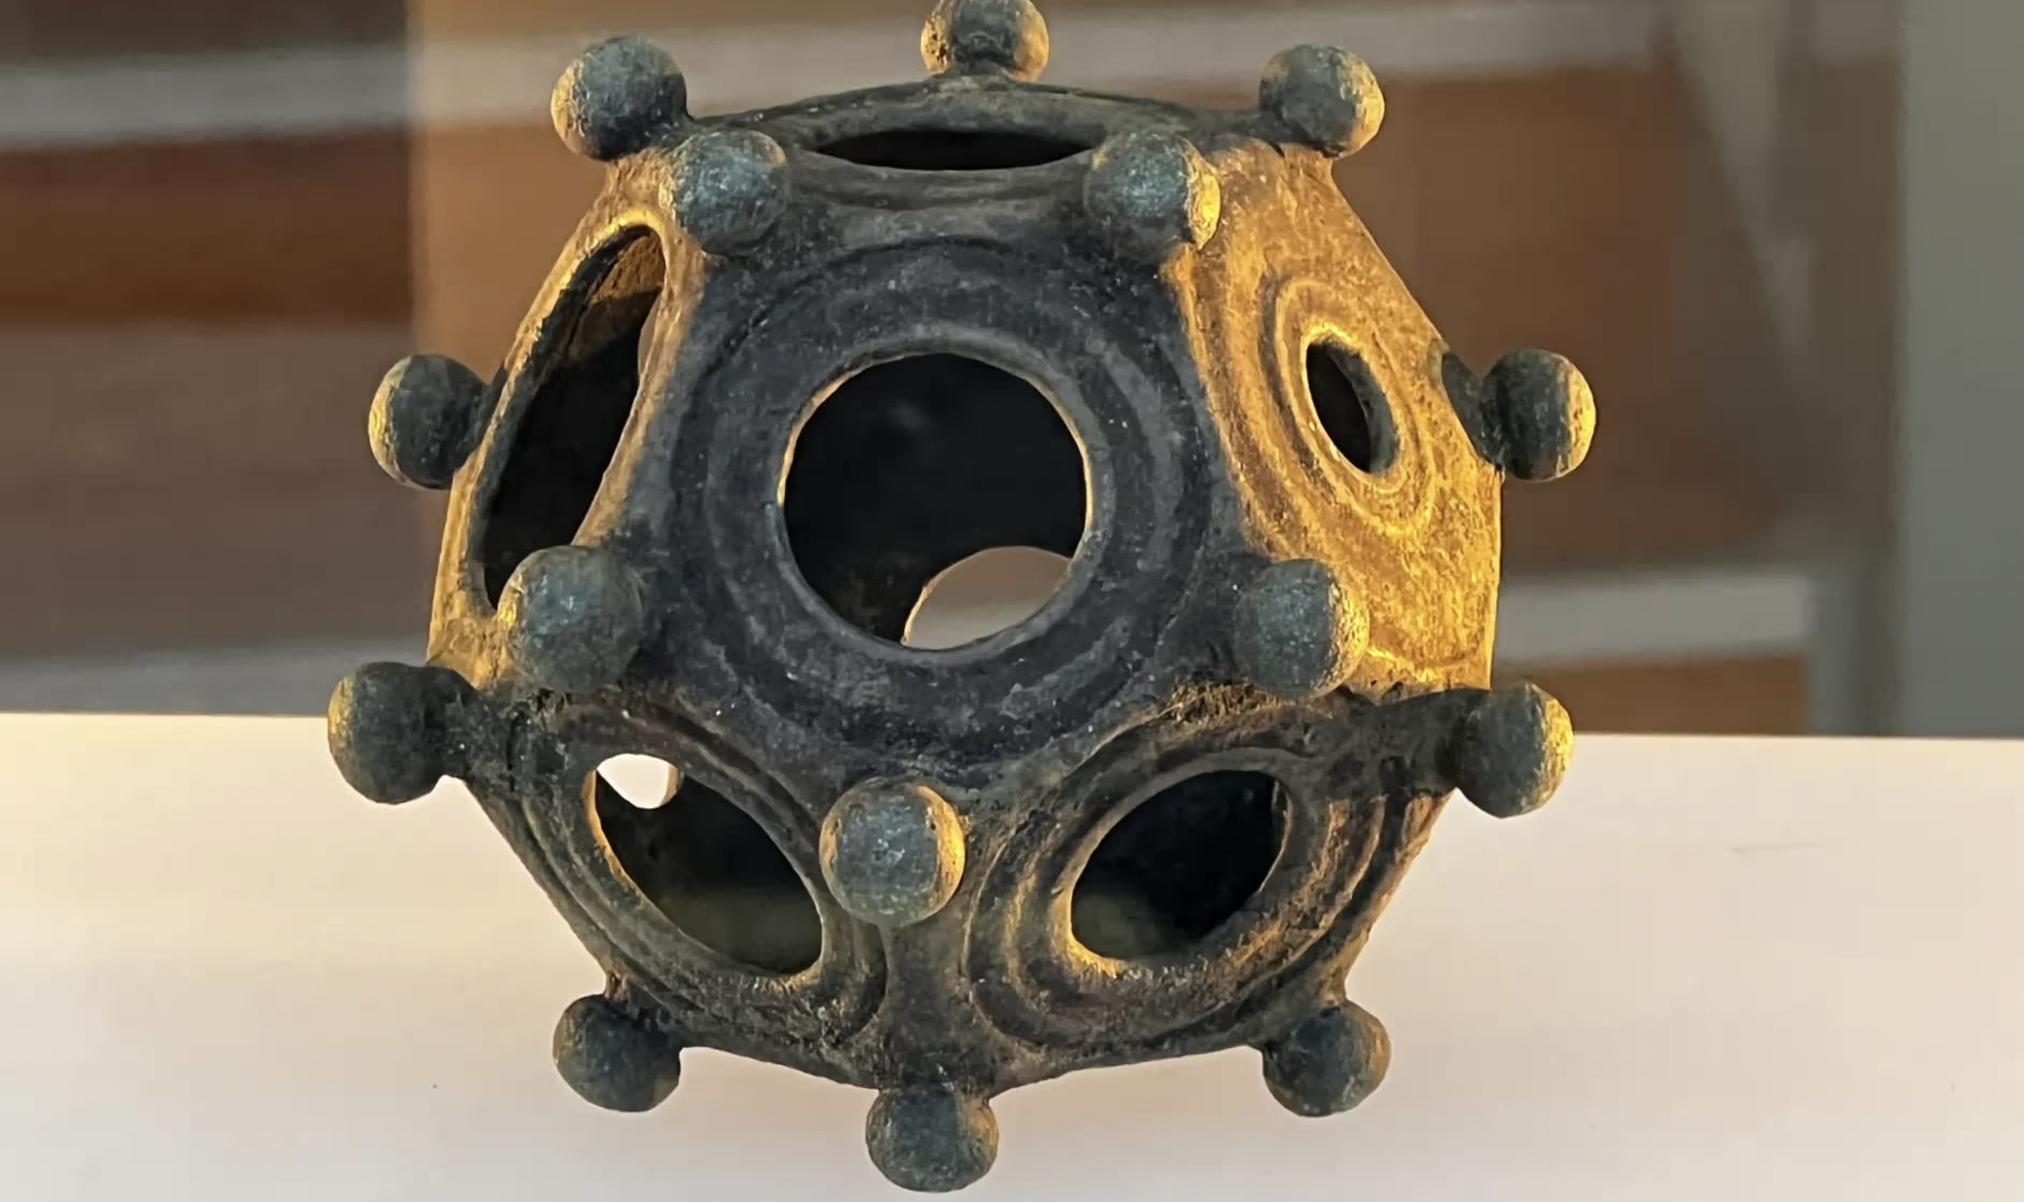 roman dodecahedron made of bronze